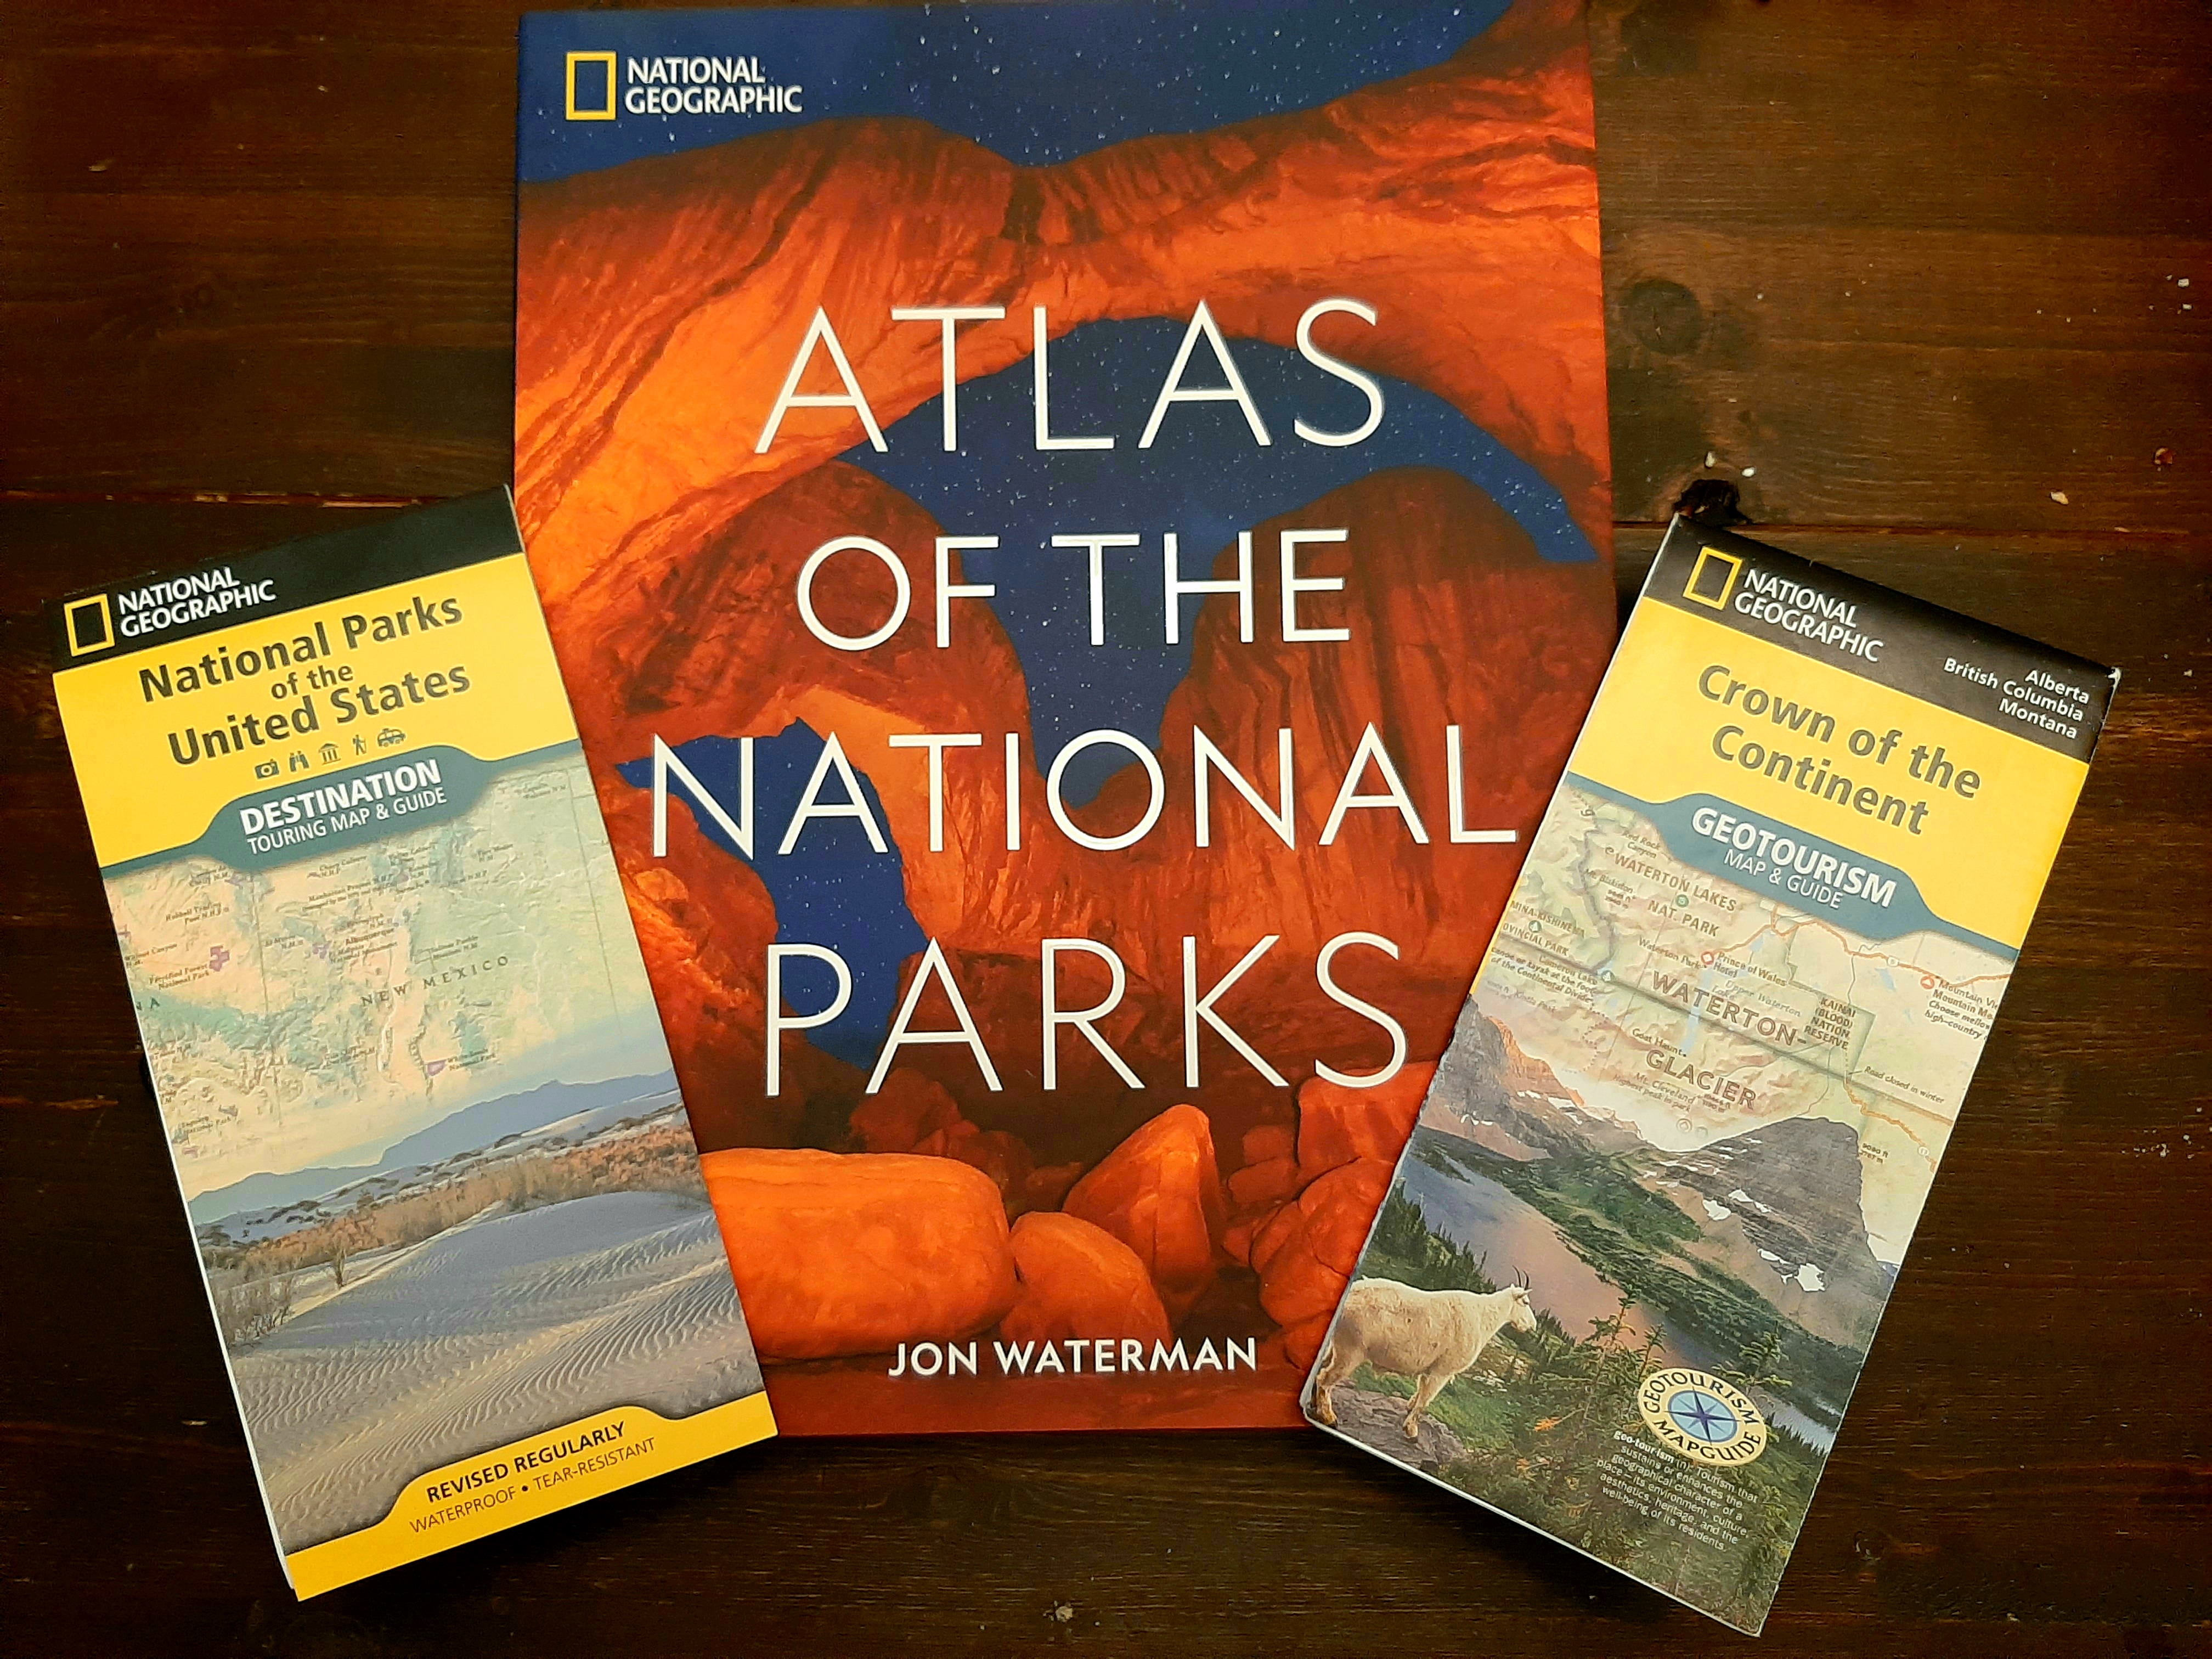 National Geographic Atlas of the National Parks by Jonathan Waterman